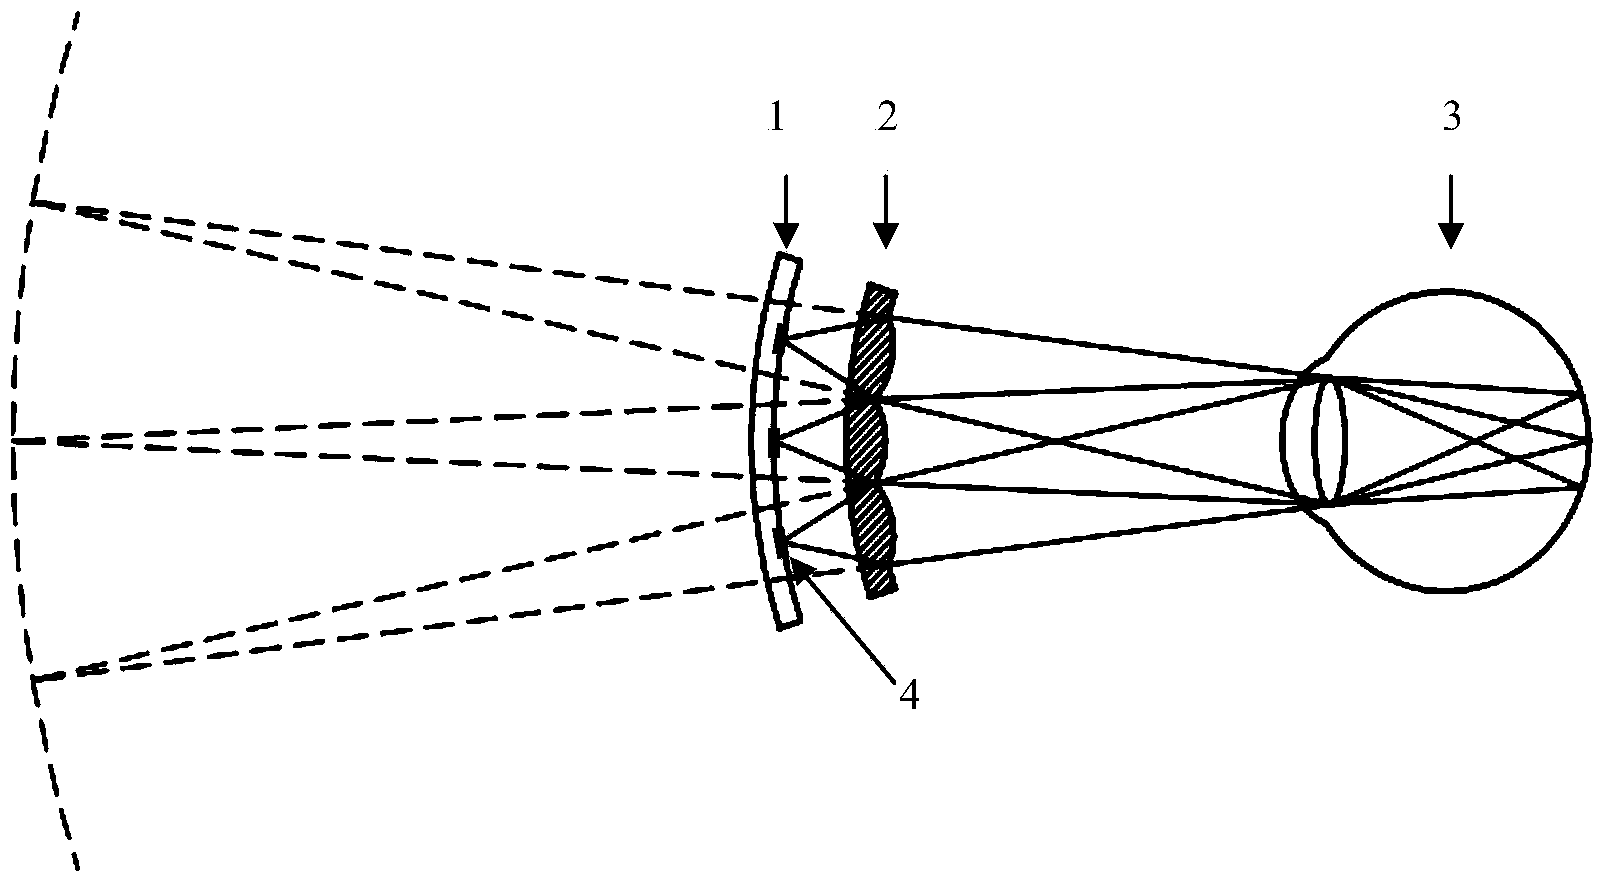 Near-to-eye display type optical system based on curved surface microlens array